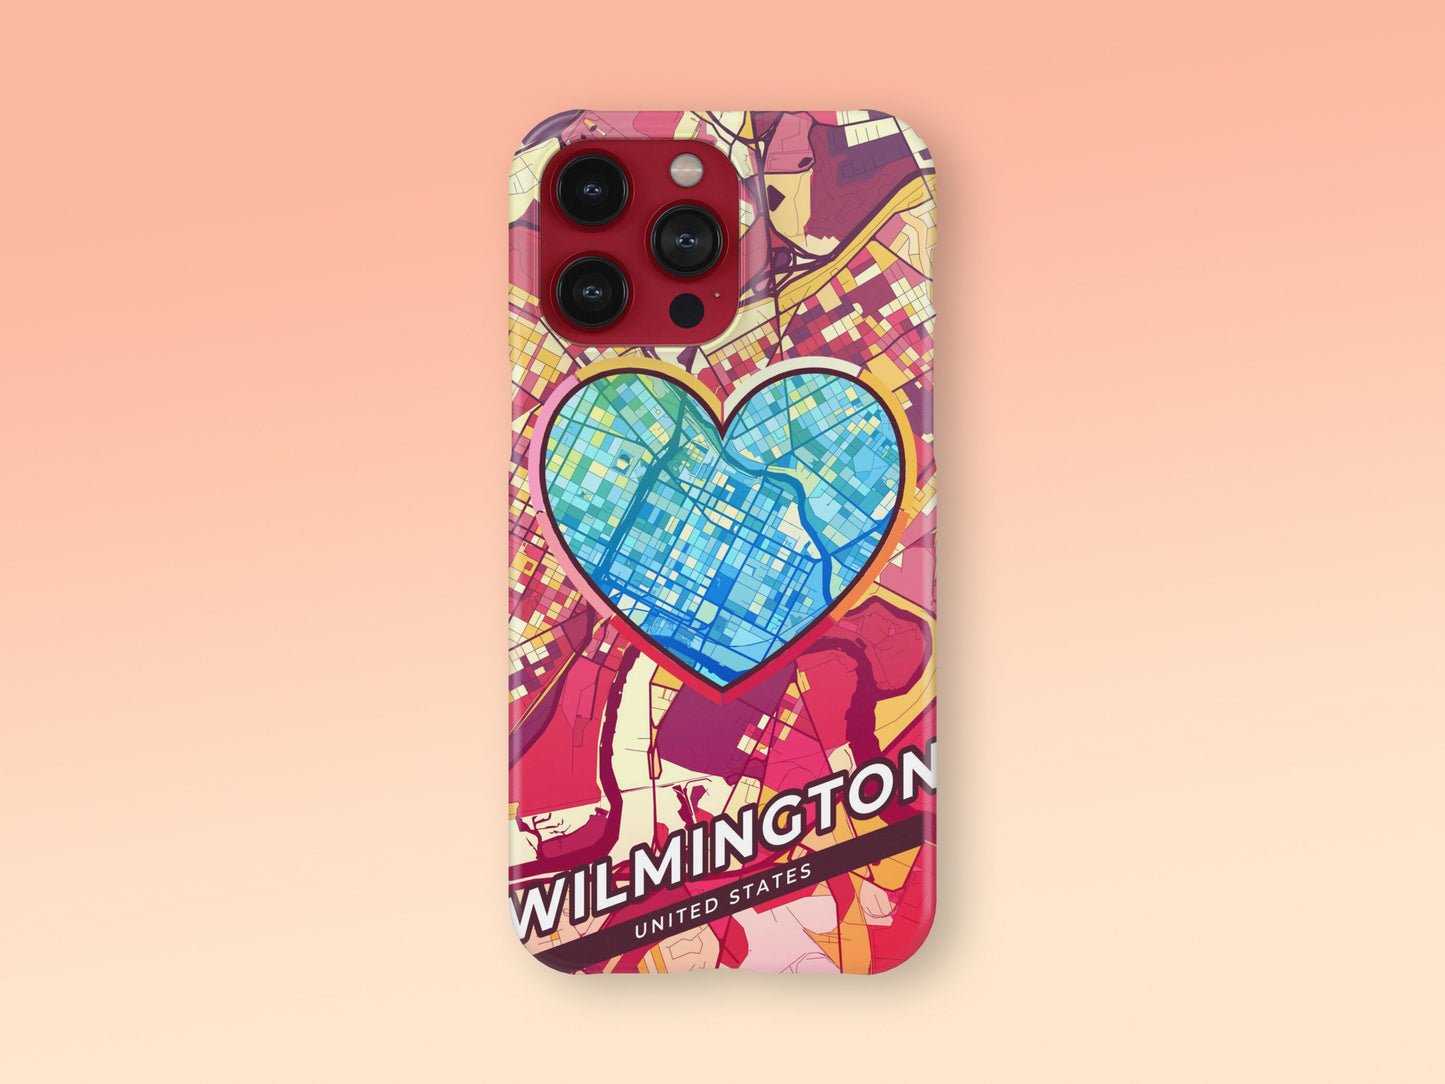 Wilmington Delaware slim phone case with colorful icon 2